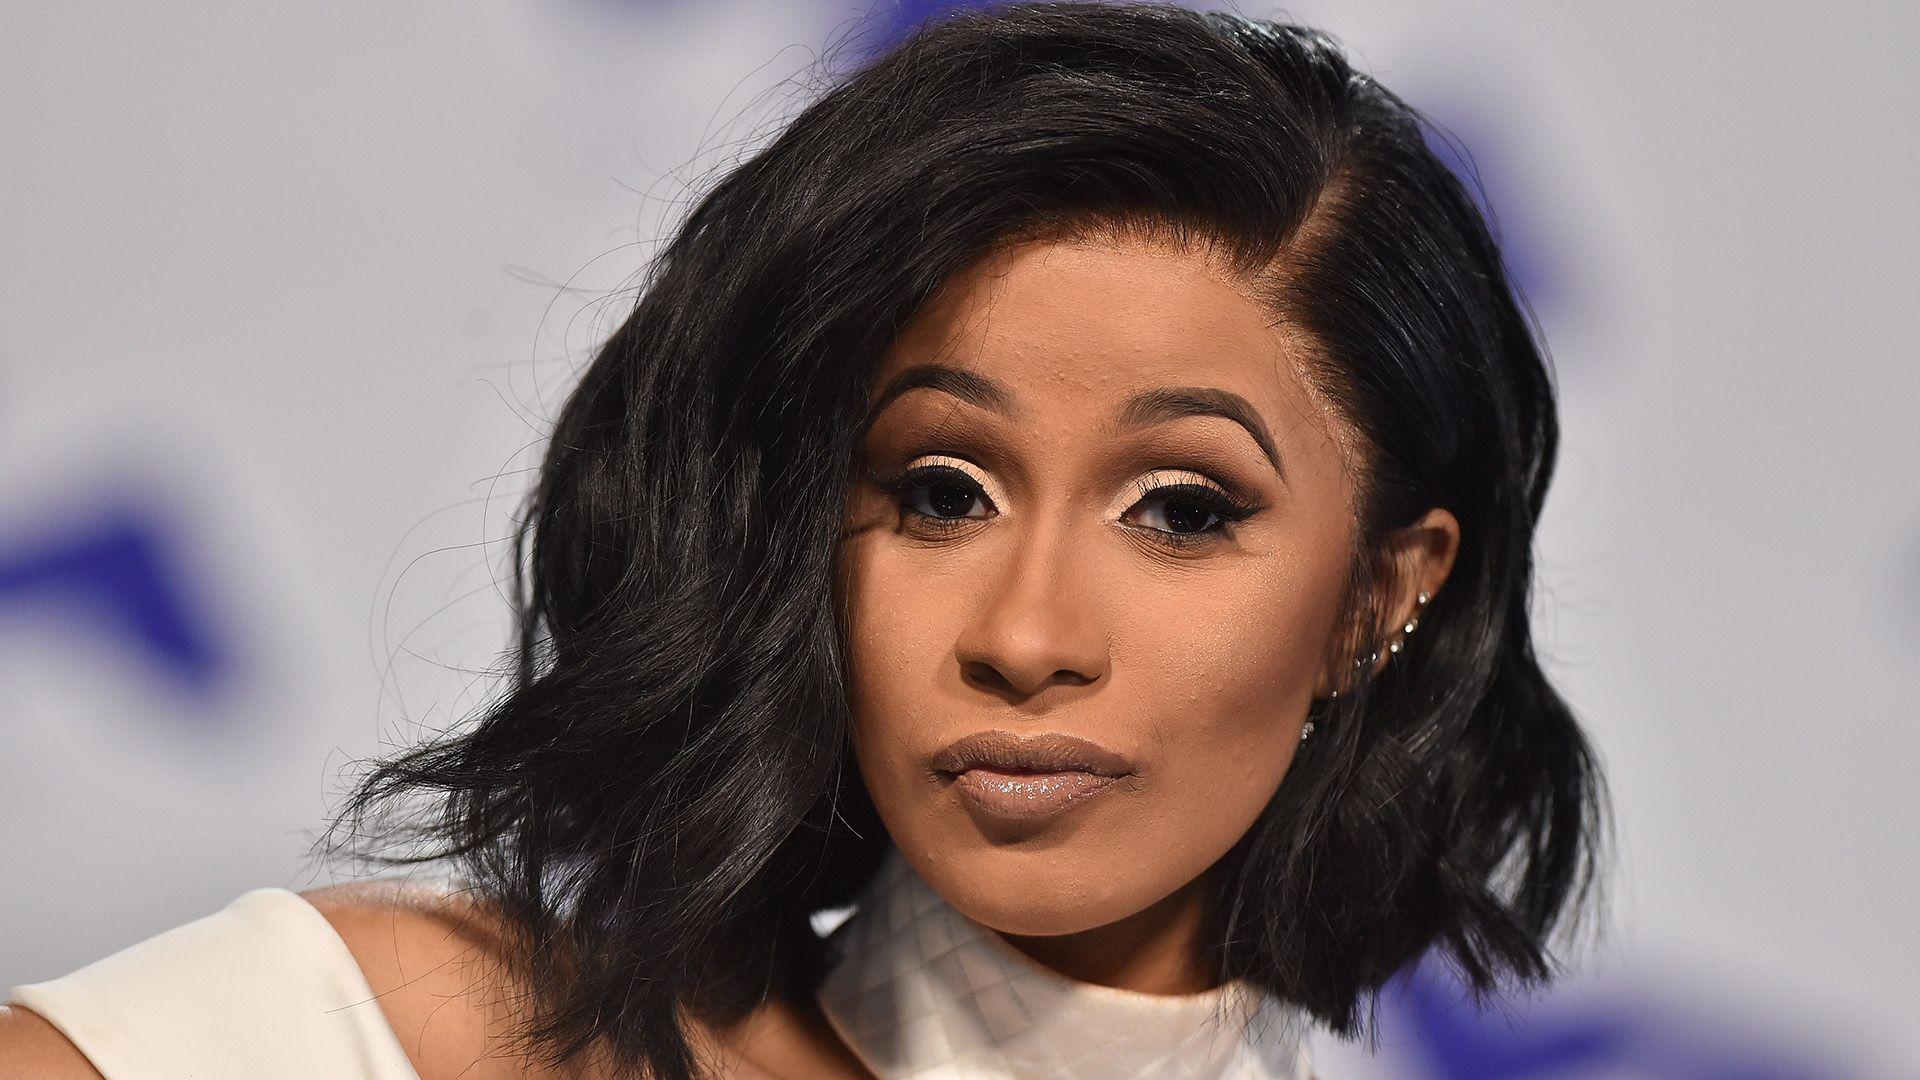 Cardi B Stuns in Tulle Dress For iHeartRadio Music Awards